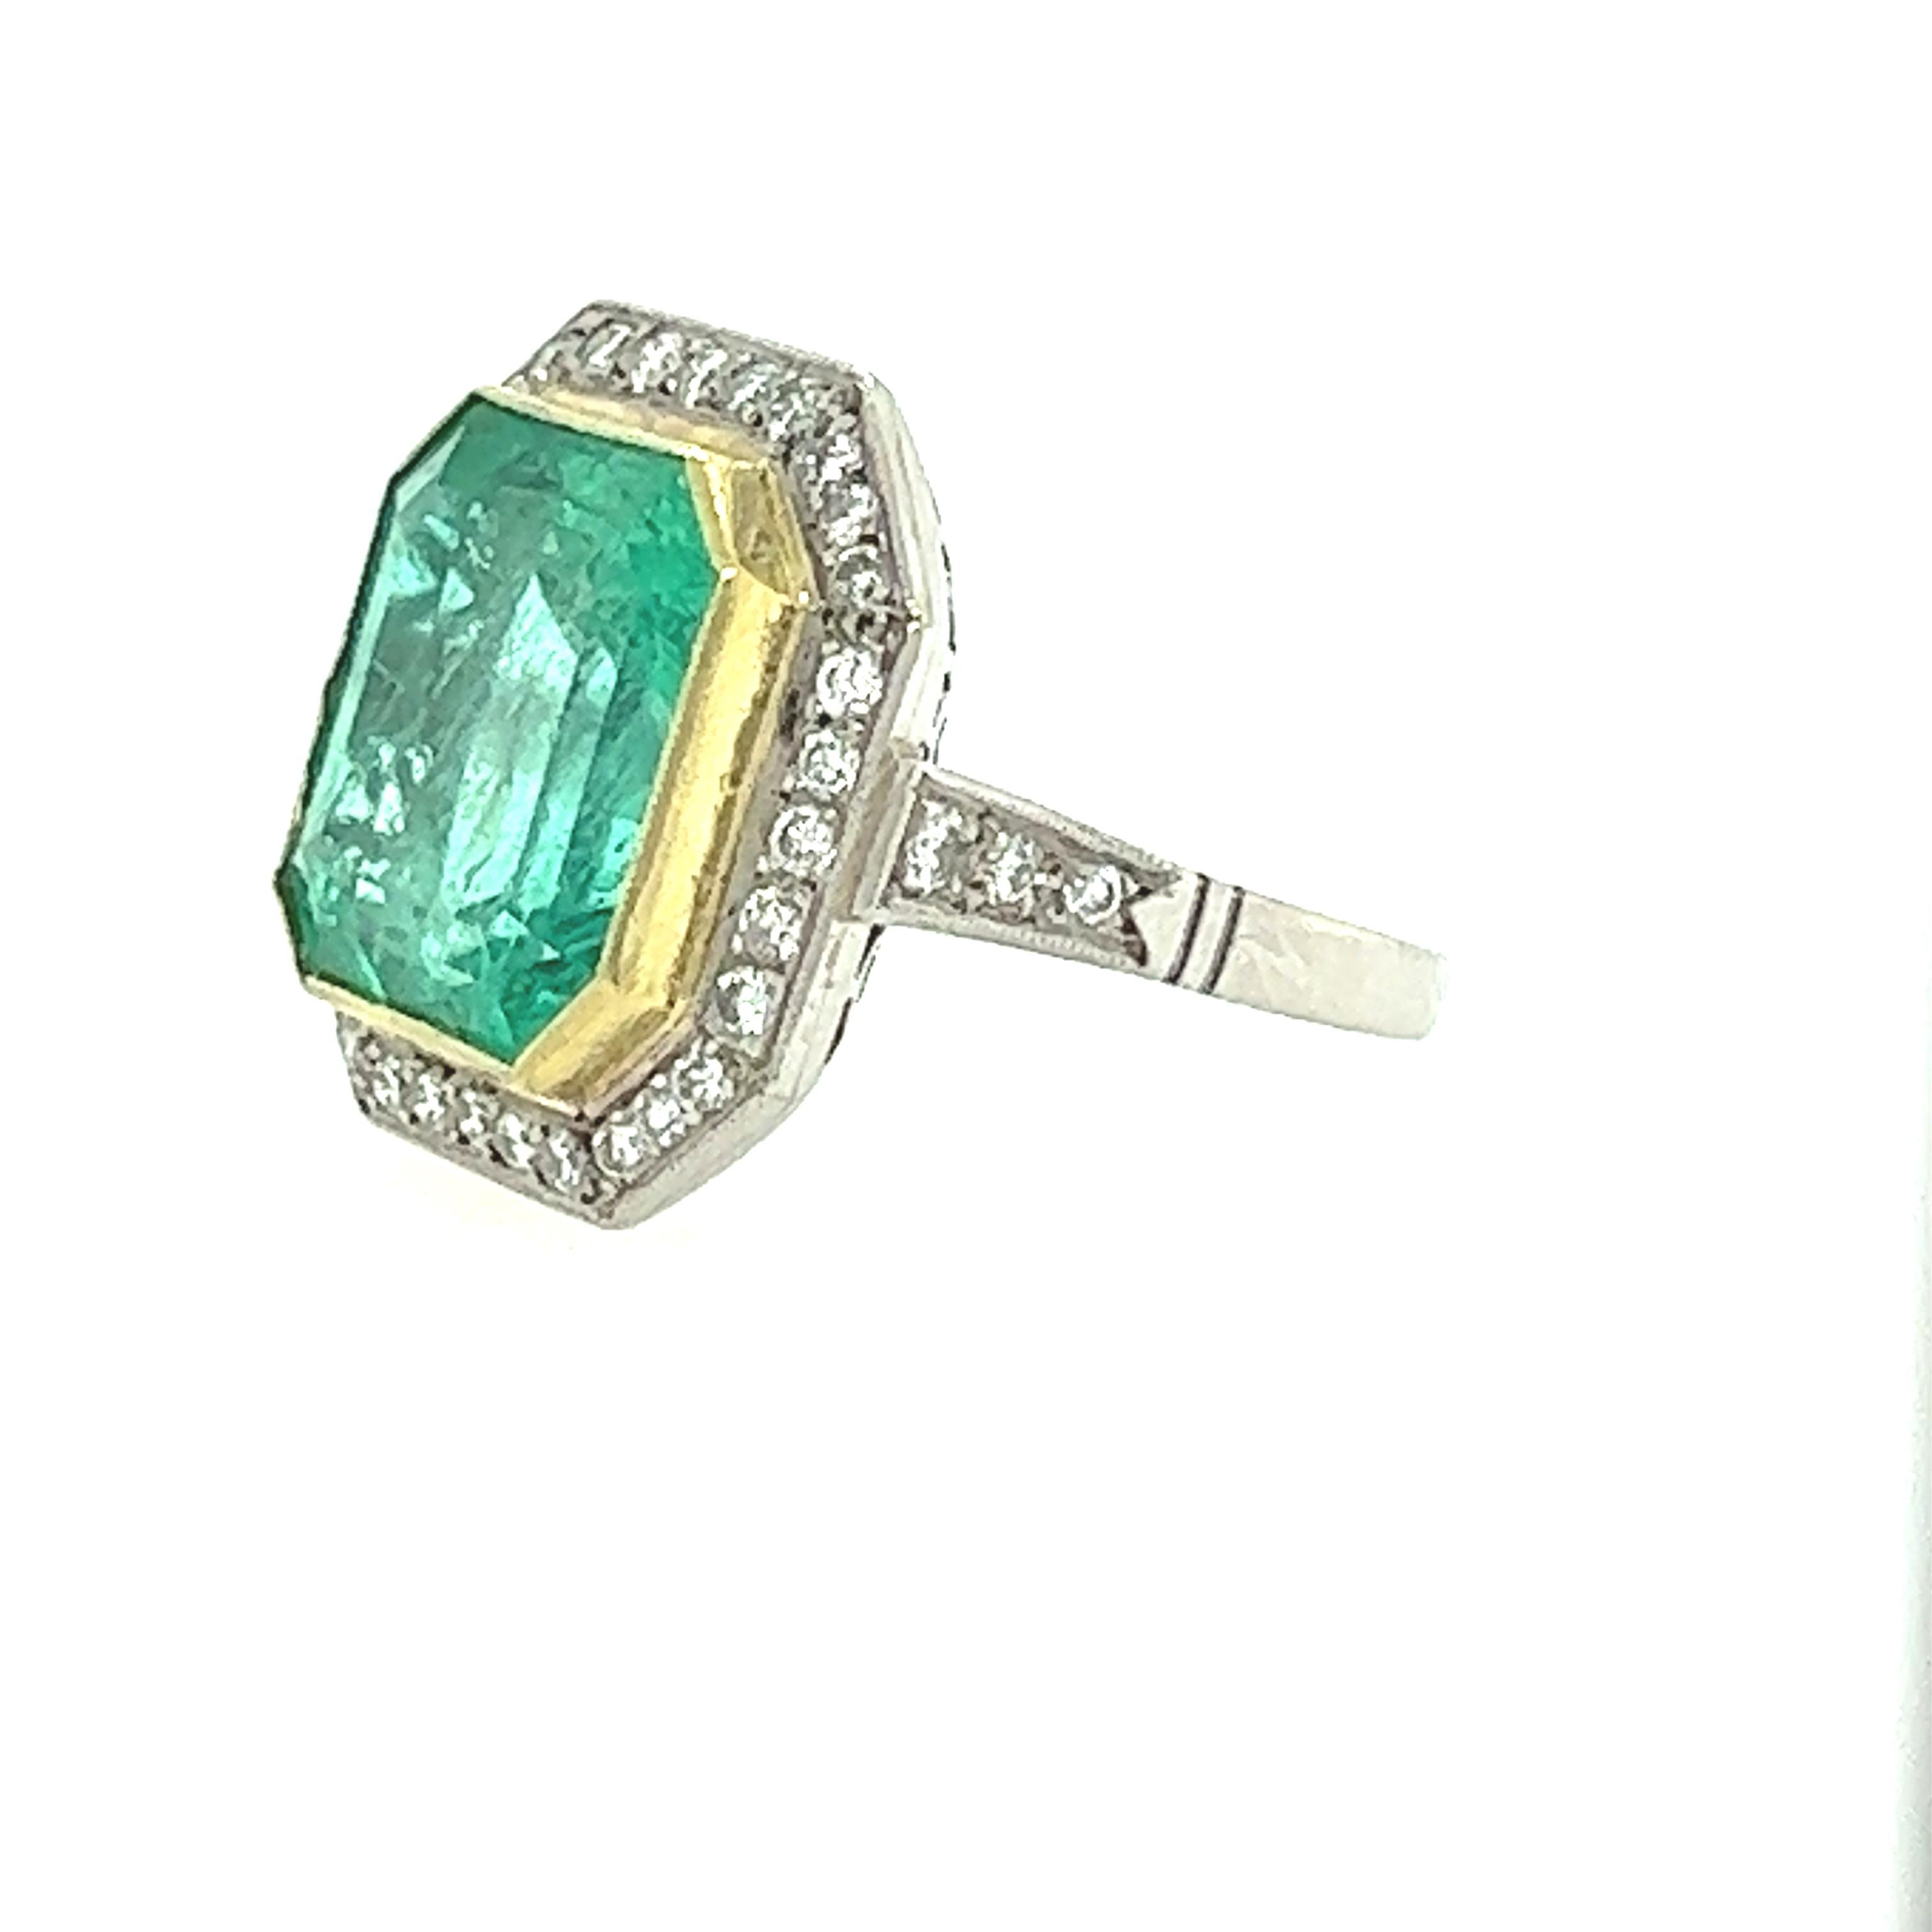 This breathtaking Art Deco style ring features a stunning 8.80 carat Columbian emerald at its center, surrounded by a glittering halo of 1.00 carats of diamonds. The platinum band of the ring is designed to showcase the timeless elegance of the Art